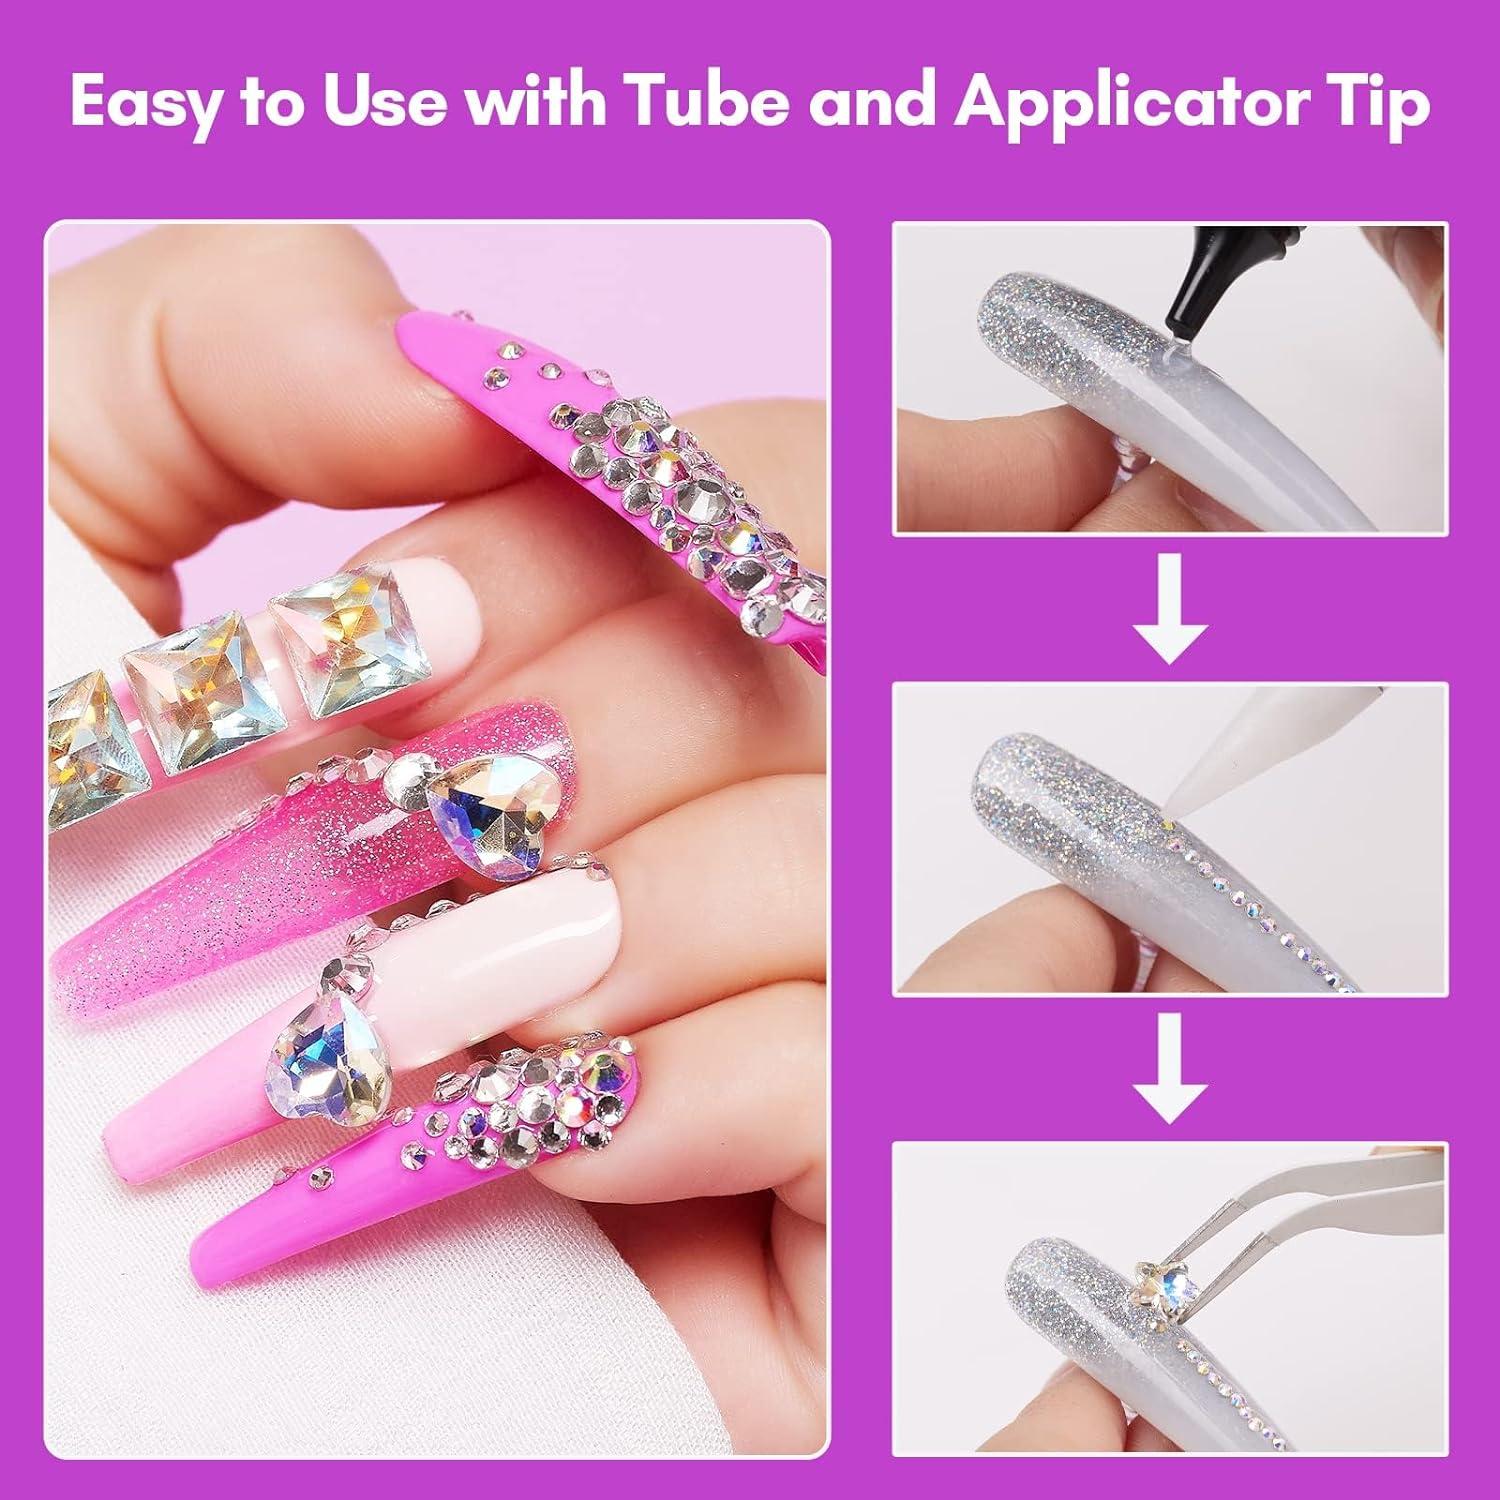 Makartt Nail Rhinestone Glue Gel, Upgrade Gel Gem Nail Glue with Brush &  Pen Tip Super Strong Adhesive Precise for Nail Charms